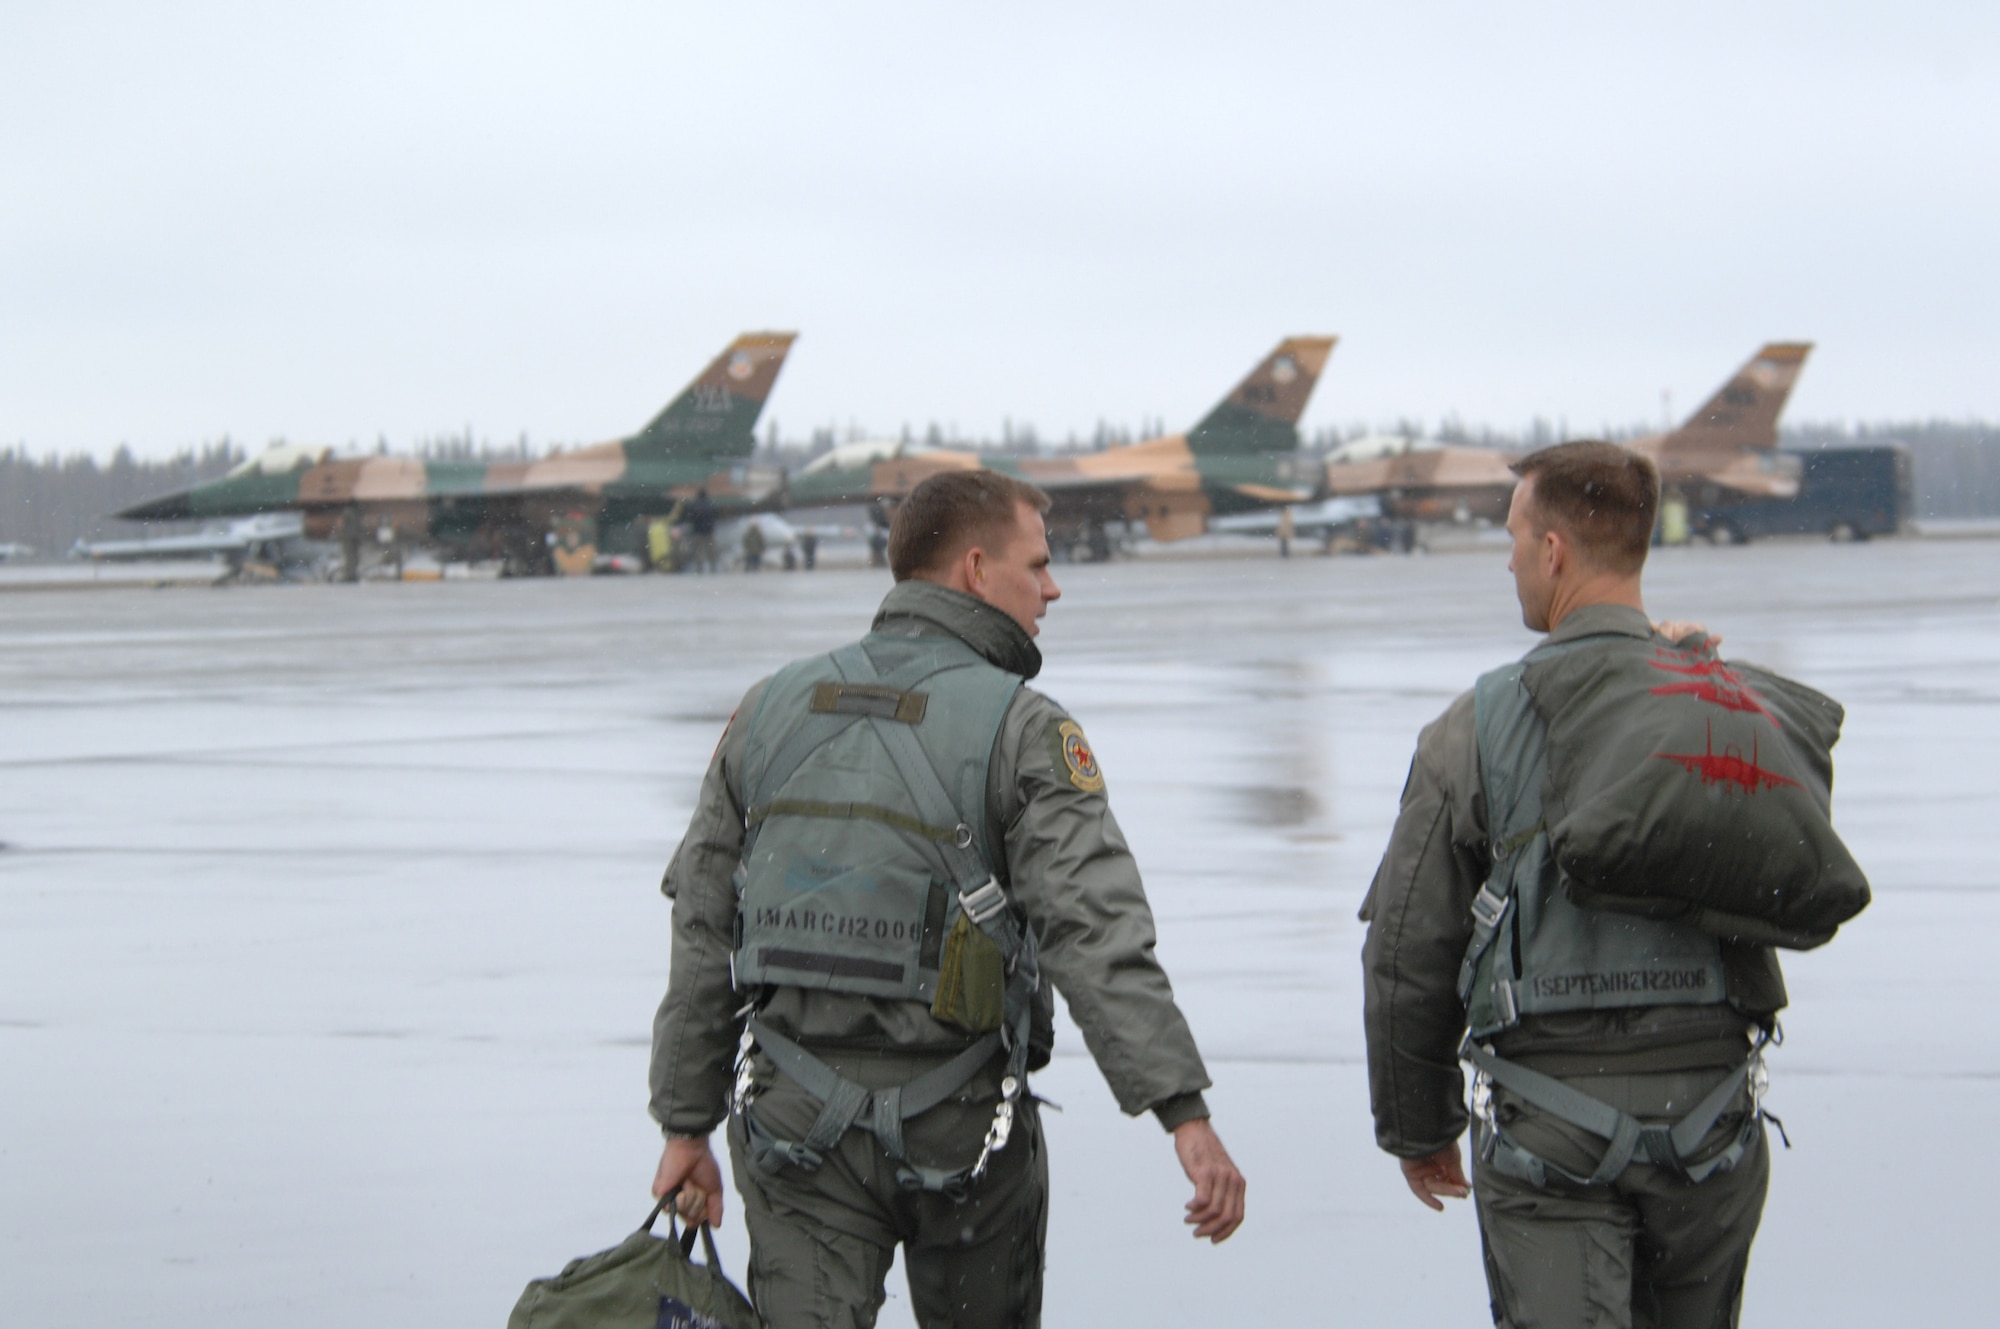 EIELSON AIR FORCE BASE, Alaska -- Two F-16 Fighting Falcon pilots from the 64th Aggressor Squadron, Nellis Air Force Base, Nevada step to their jets prior to a mission during Red Flag-Alaska 07-1. Red Flag-Alaska is a Pacific Air Forces-directed field training exercise for U.S. forces flown under simulated air combat conditions. It is conducted on the Pacific Alaskan Range Complex with air operations flown out of Eielson and Elmendorf Air Force Bases. 
(U.S. Air Force Photo by Staff Sgt Joshua Strang) 